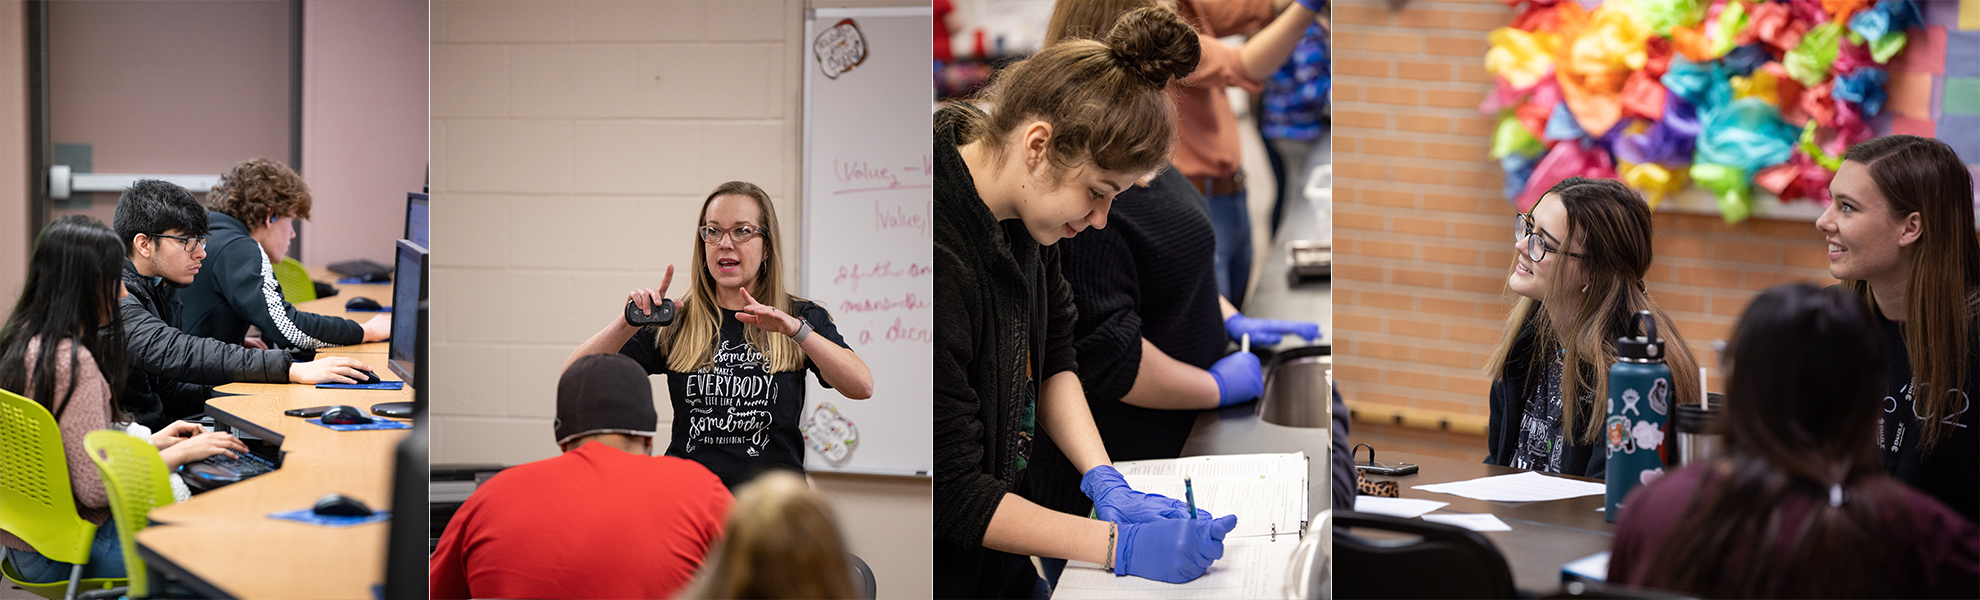 In this collage of pictures, SSC students and teachers are shown engaged in several classroom and lab settings.